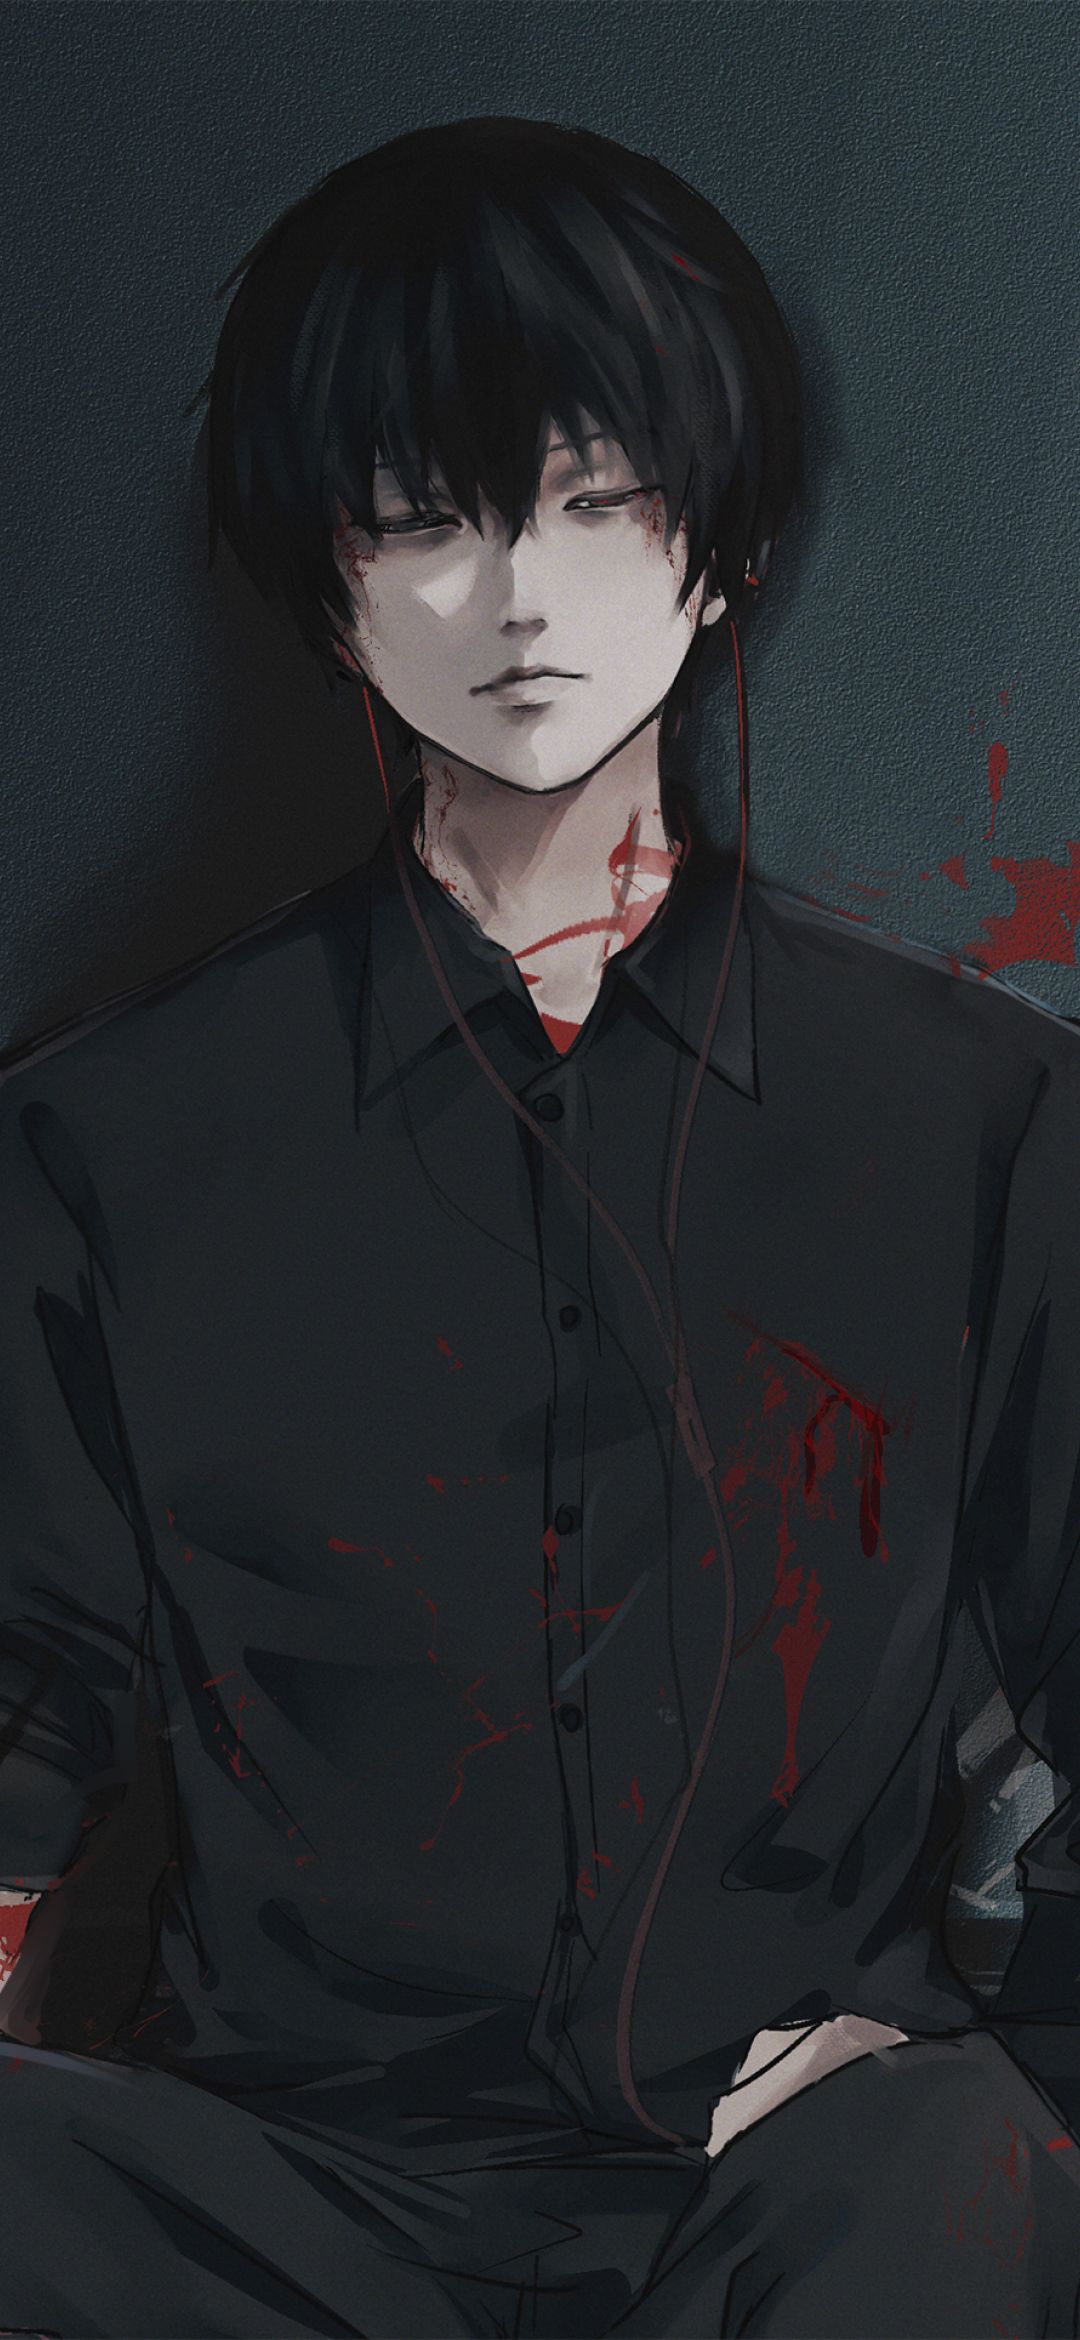 1080x2340 Ken Kaneki From Tokyo Ghoul 1080x2340 Resolution Wallpaper, HD Anime 4K Wallpapers, Image, Photos and Backgrounds